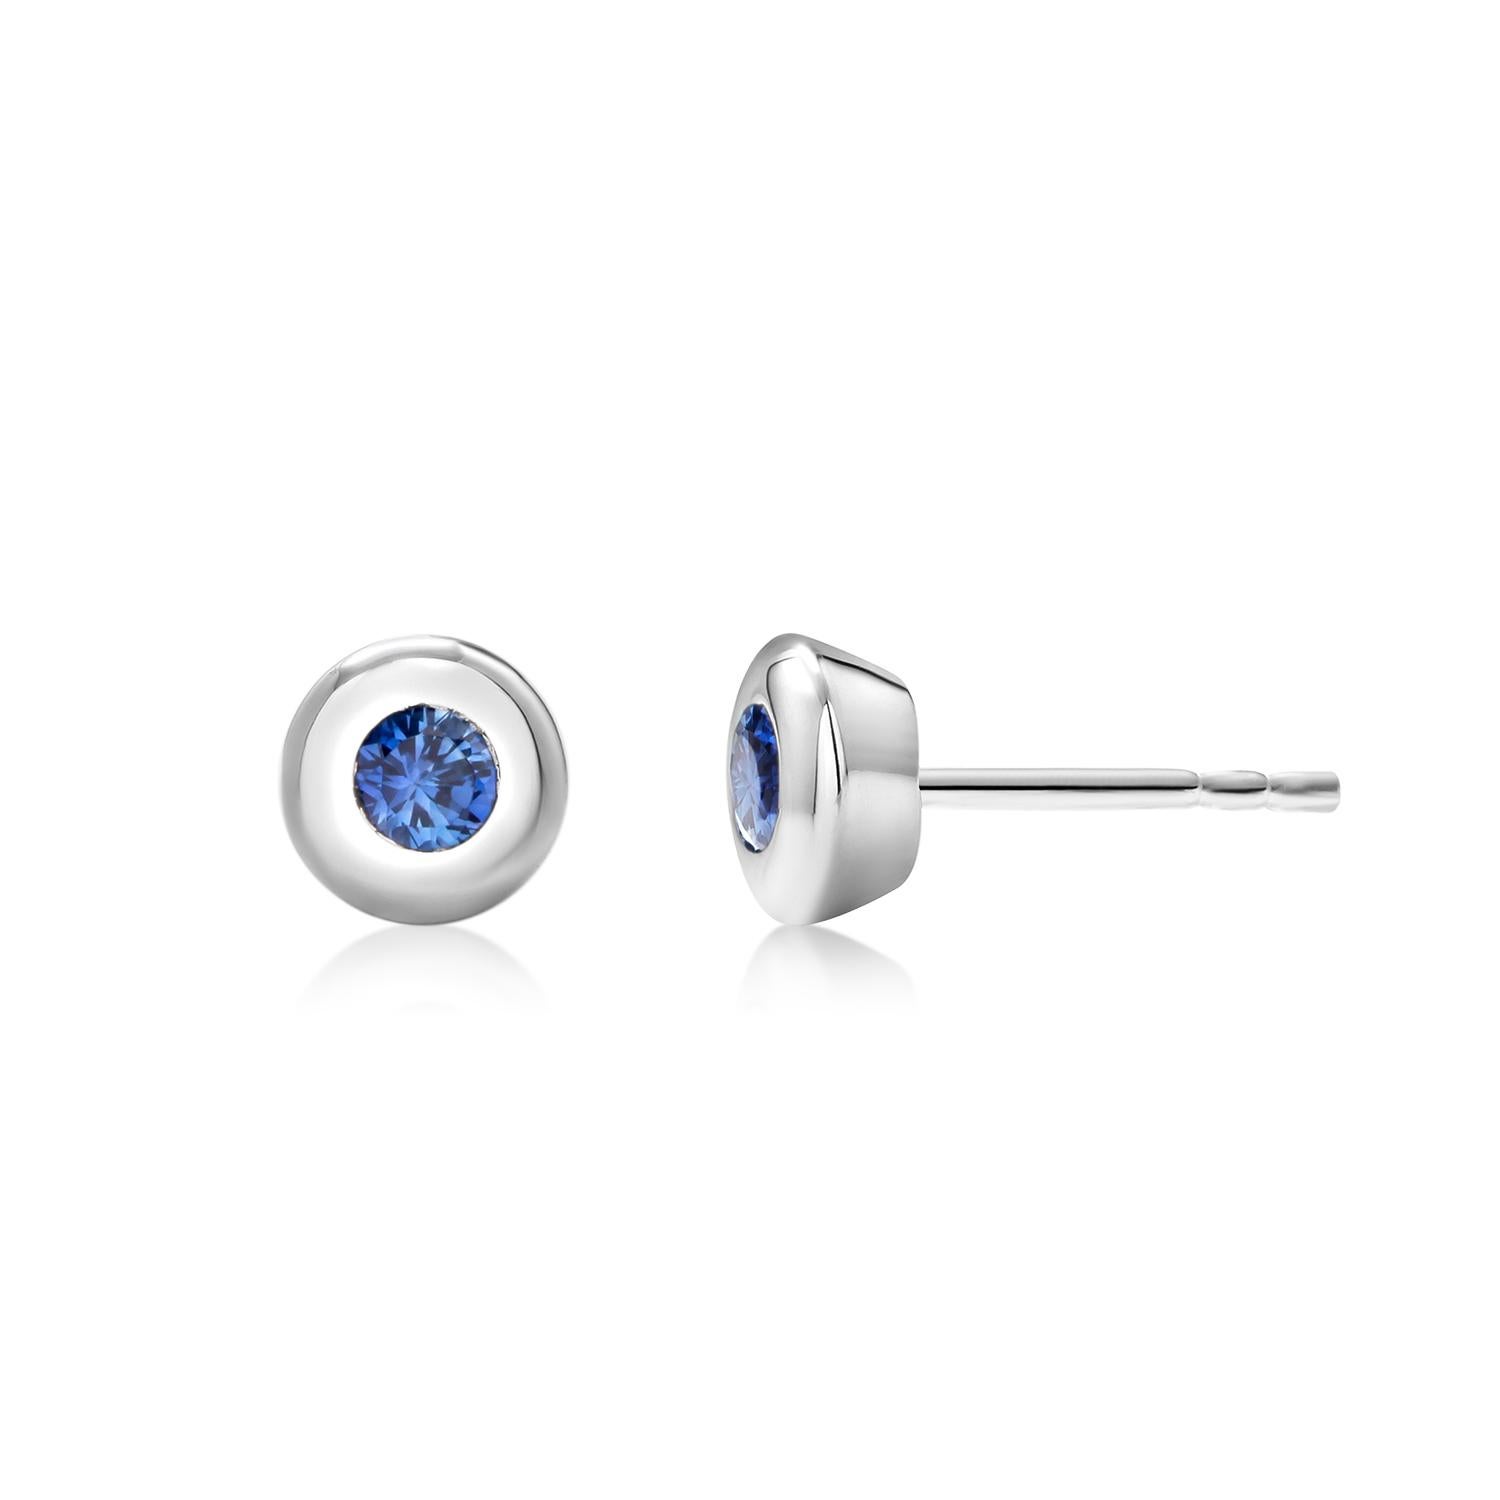 14 karat white gold round sapphire stud earrings
Two round sapphires measuring 3 millimeters each 
Sapphire hue tone color is cornflower blue
Sapphires weighing 0.30   
New Earrings
New Earrings
Handmade in the USA
The 14 karat gold earrings are